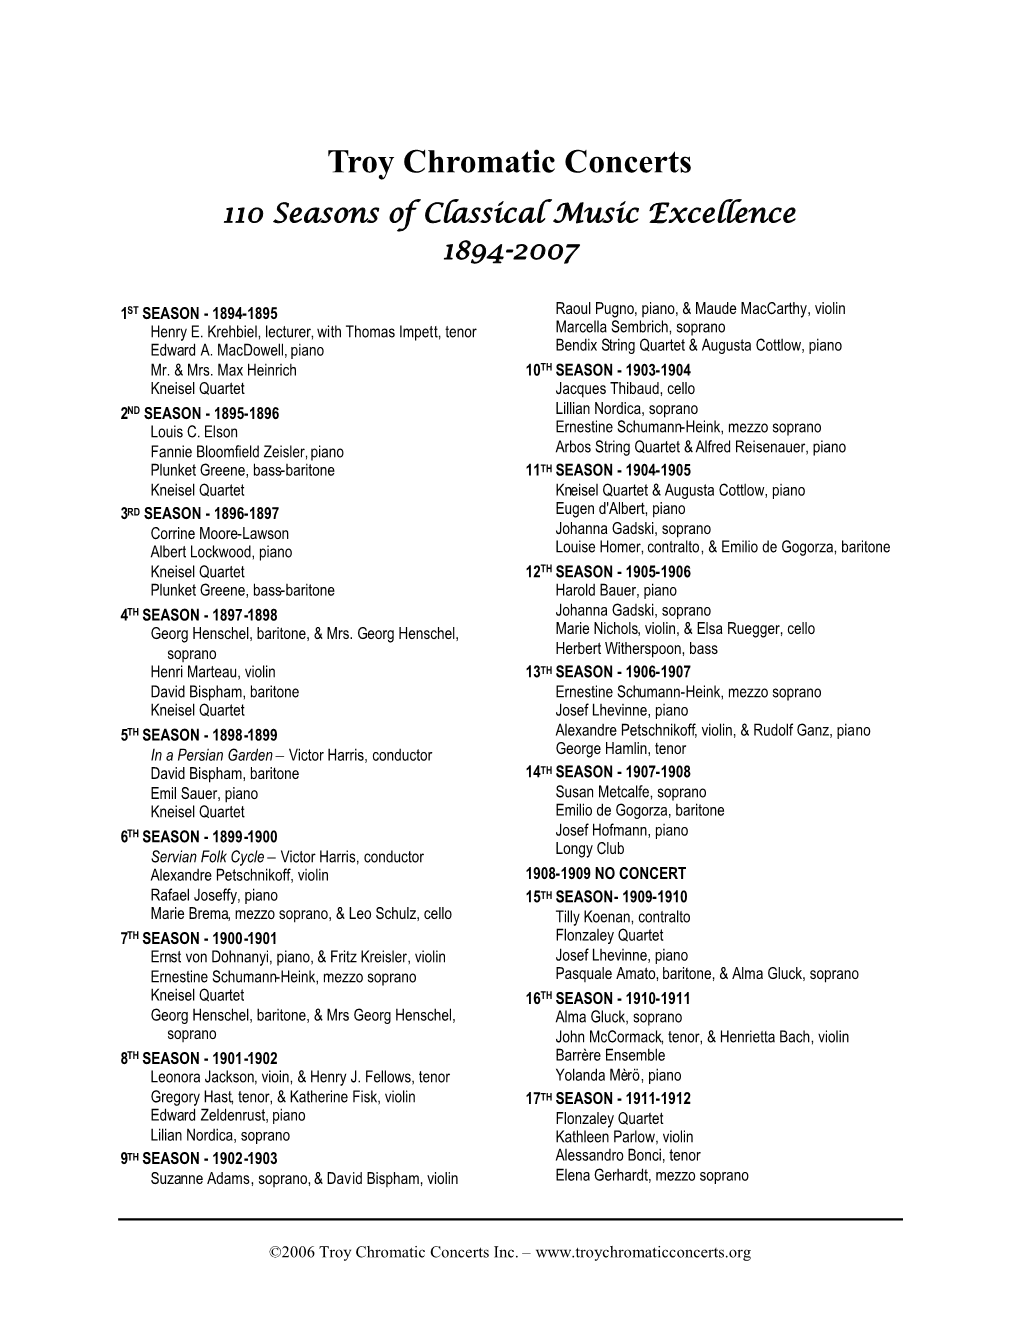 Troy Chromatic Concerts Performers 1894-2007